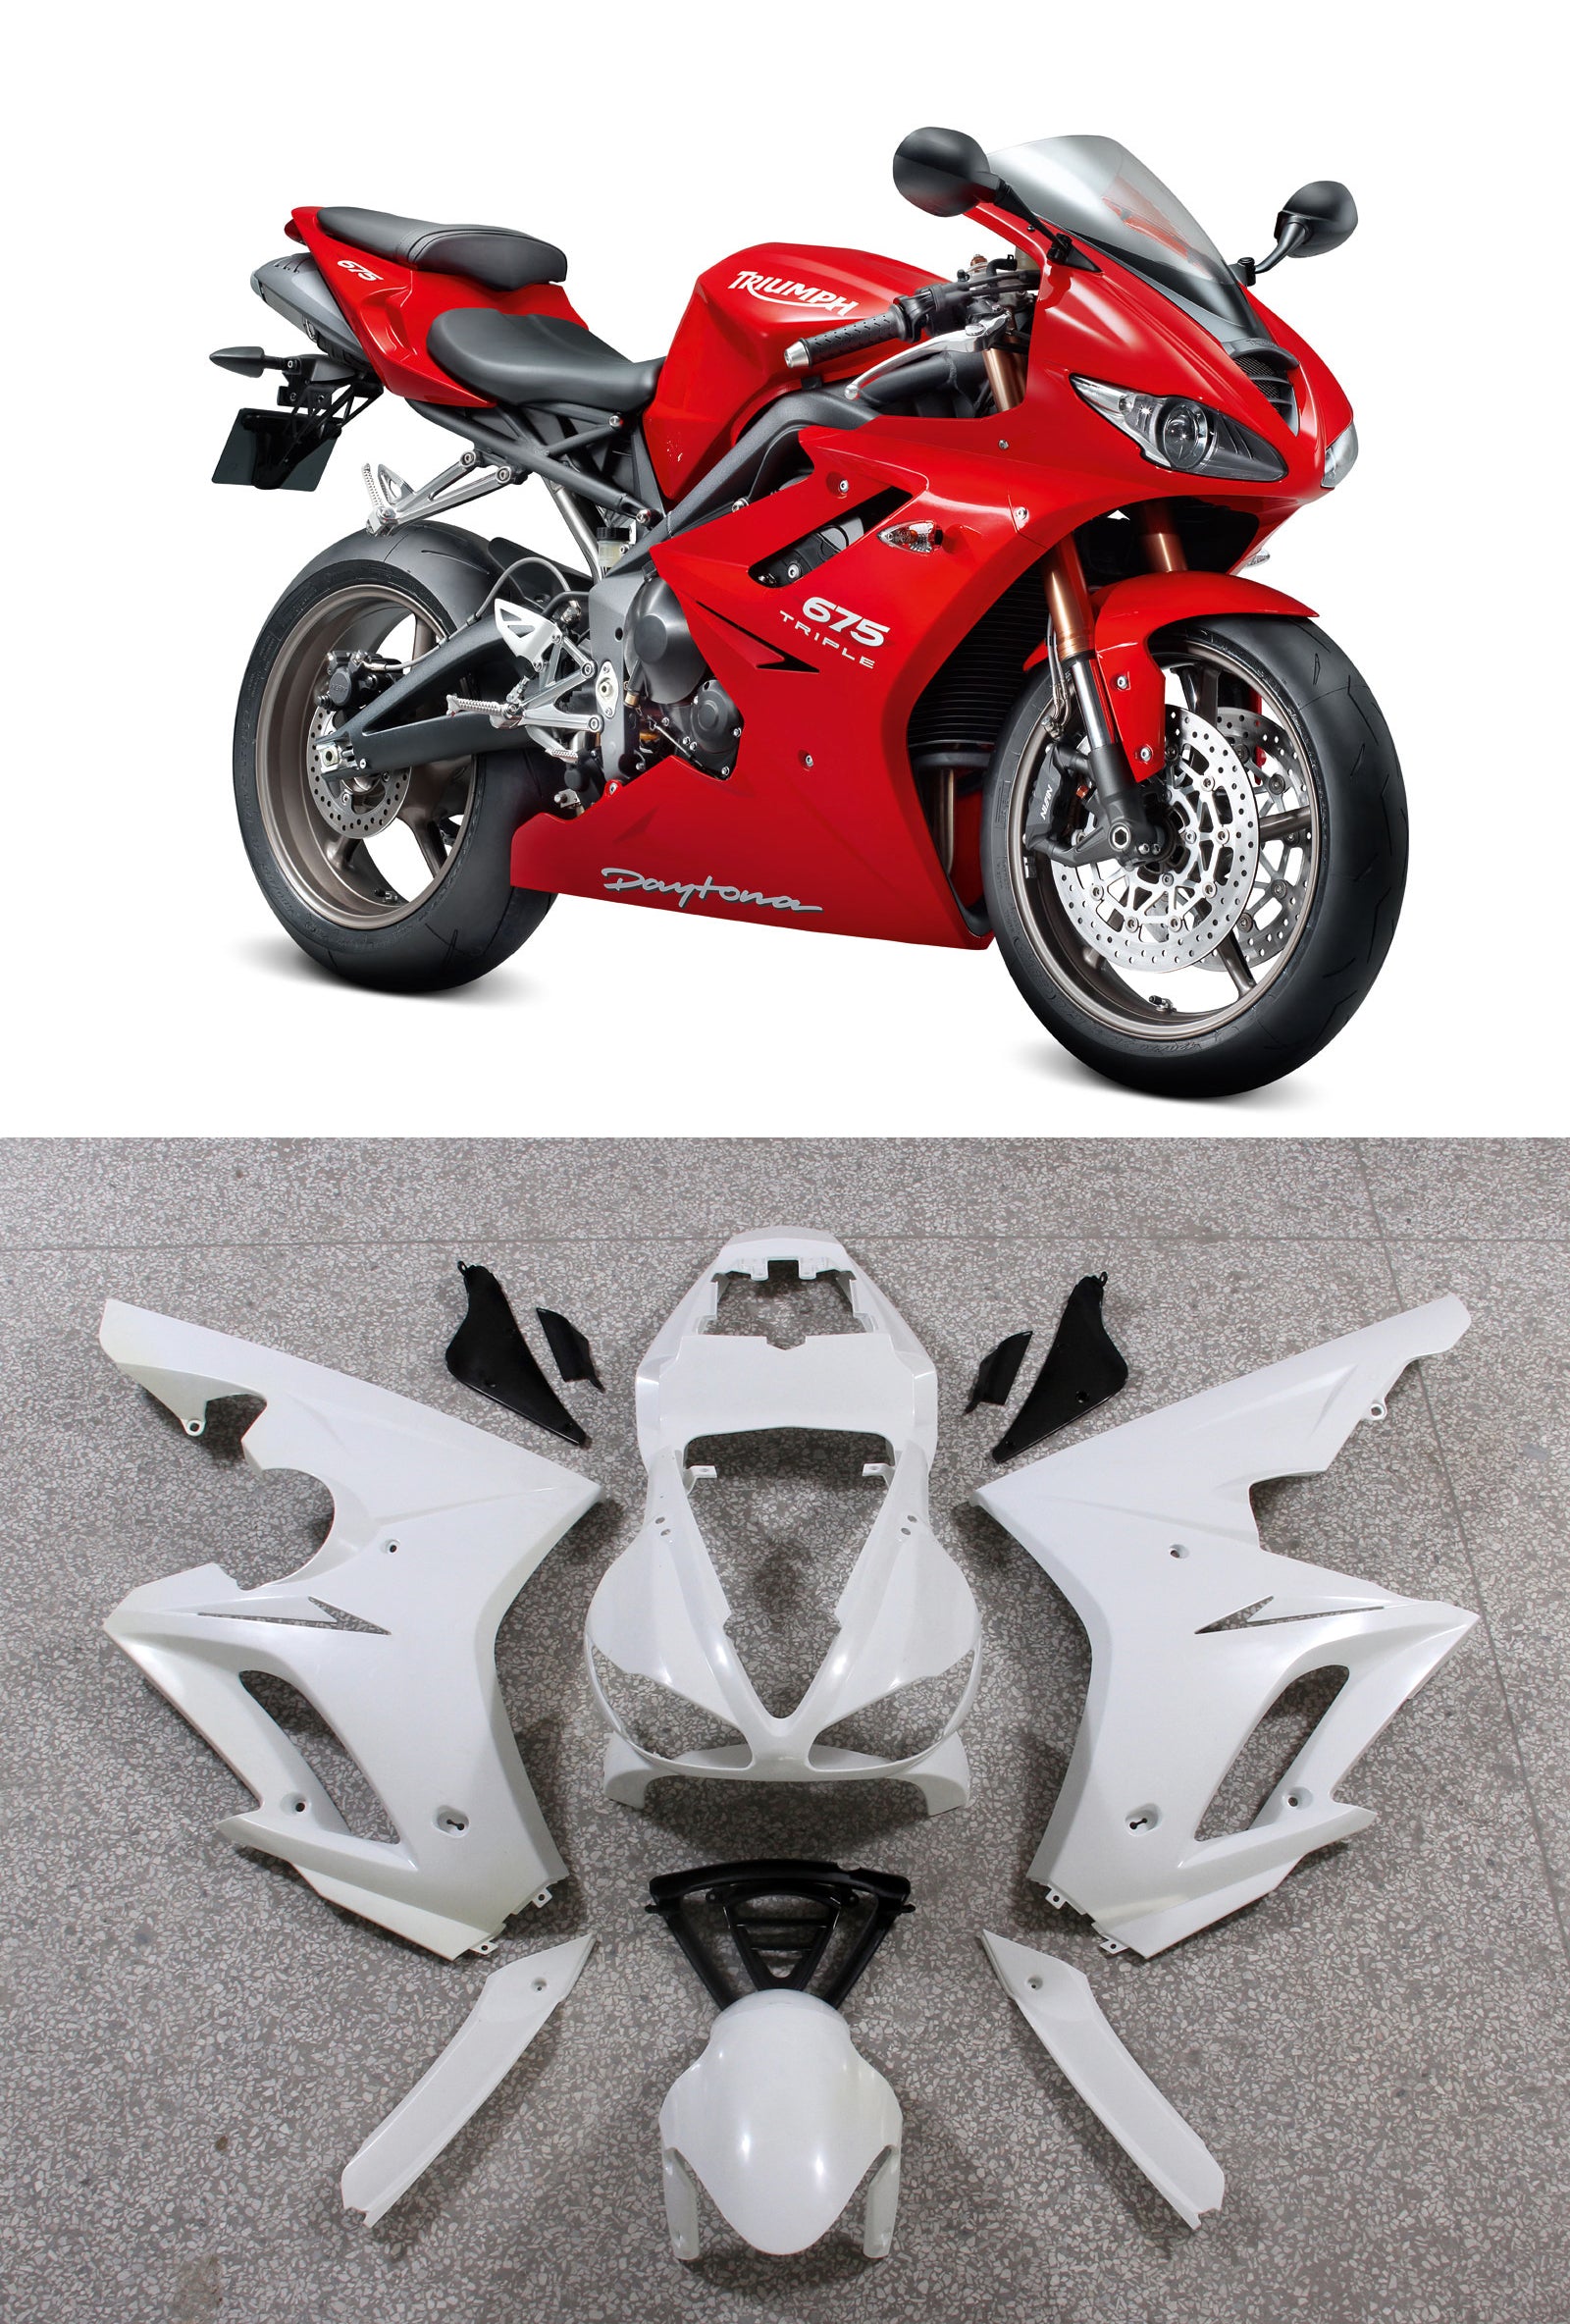 Generic Fit For Triumph Daytona 675 (2009-2012) Bodywork Fairing ABS Injection Molding 9 Style